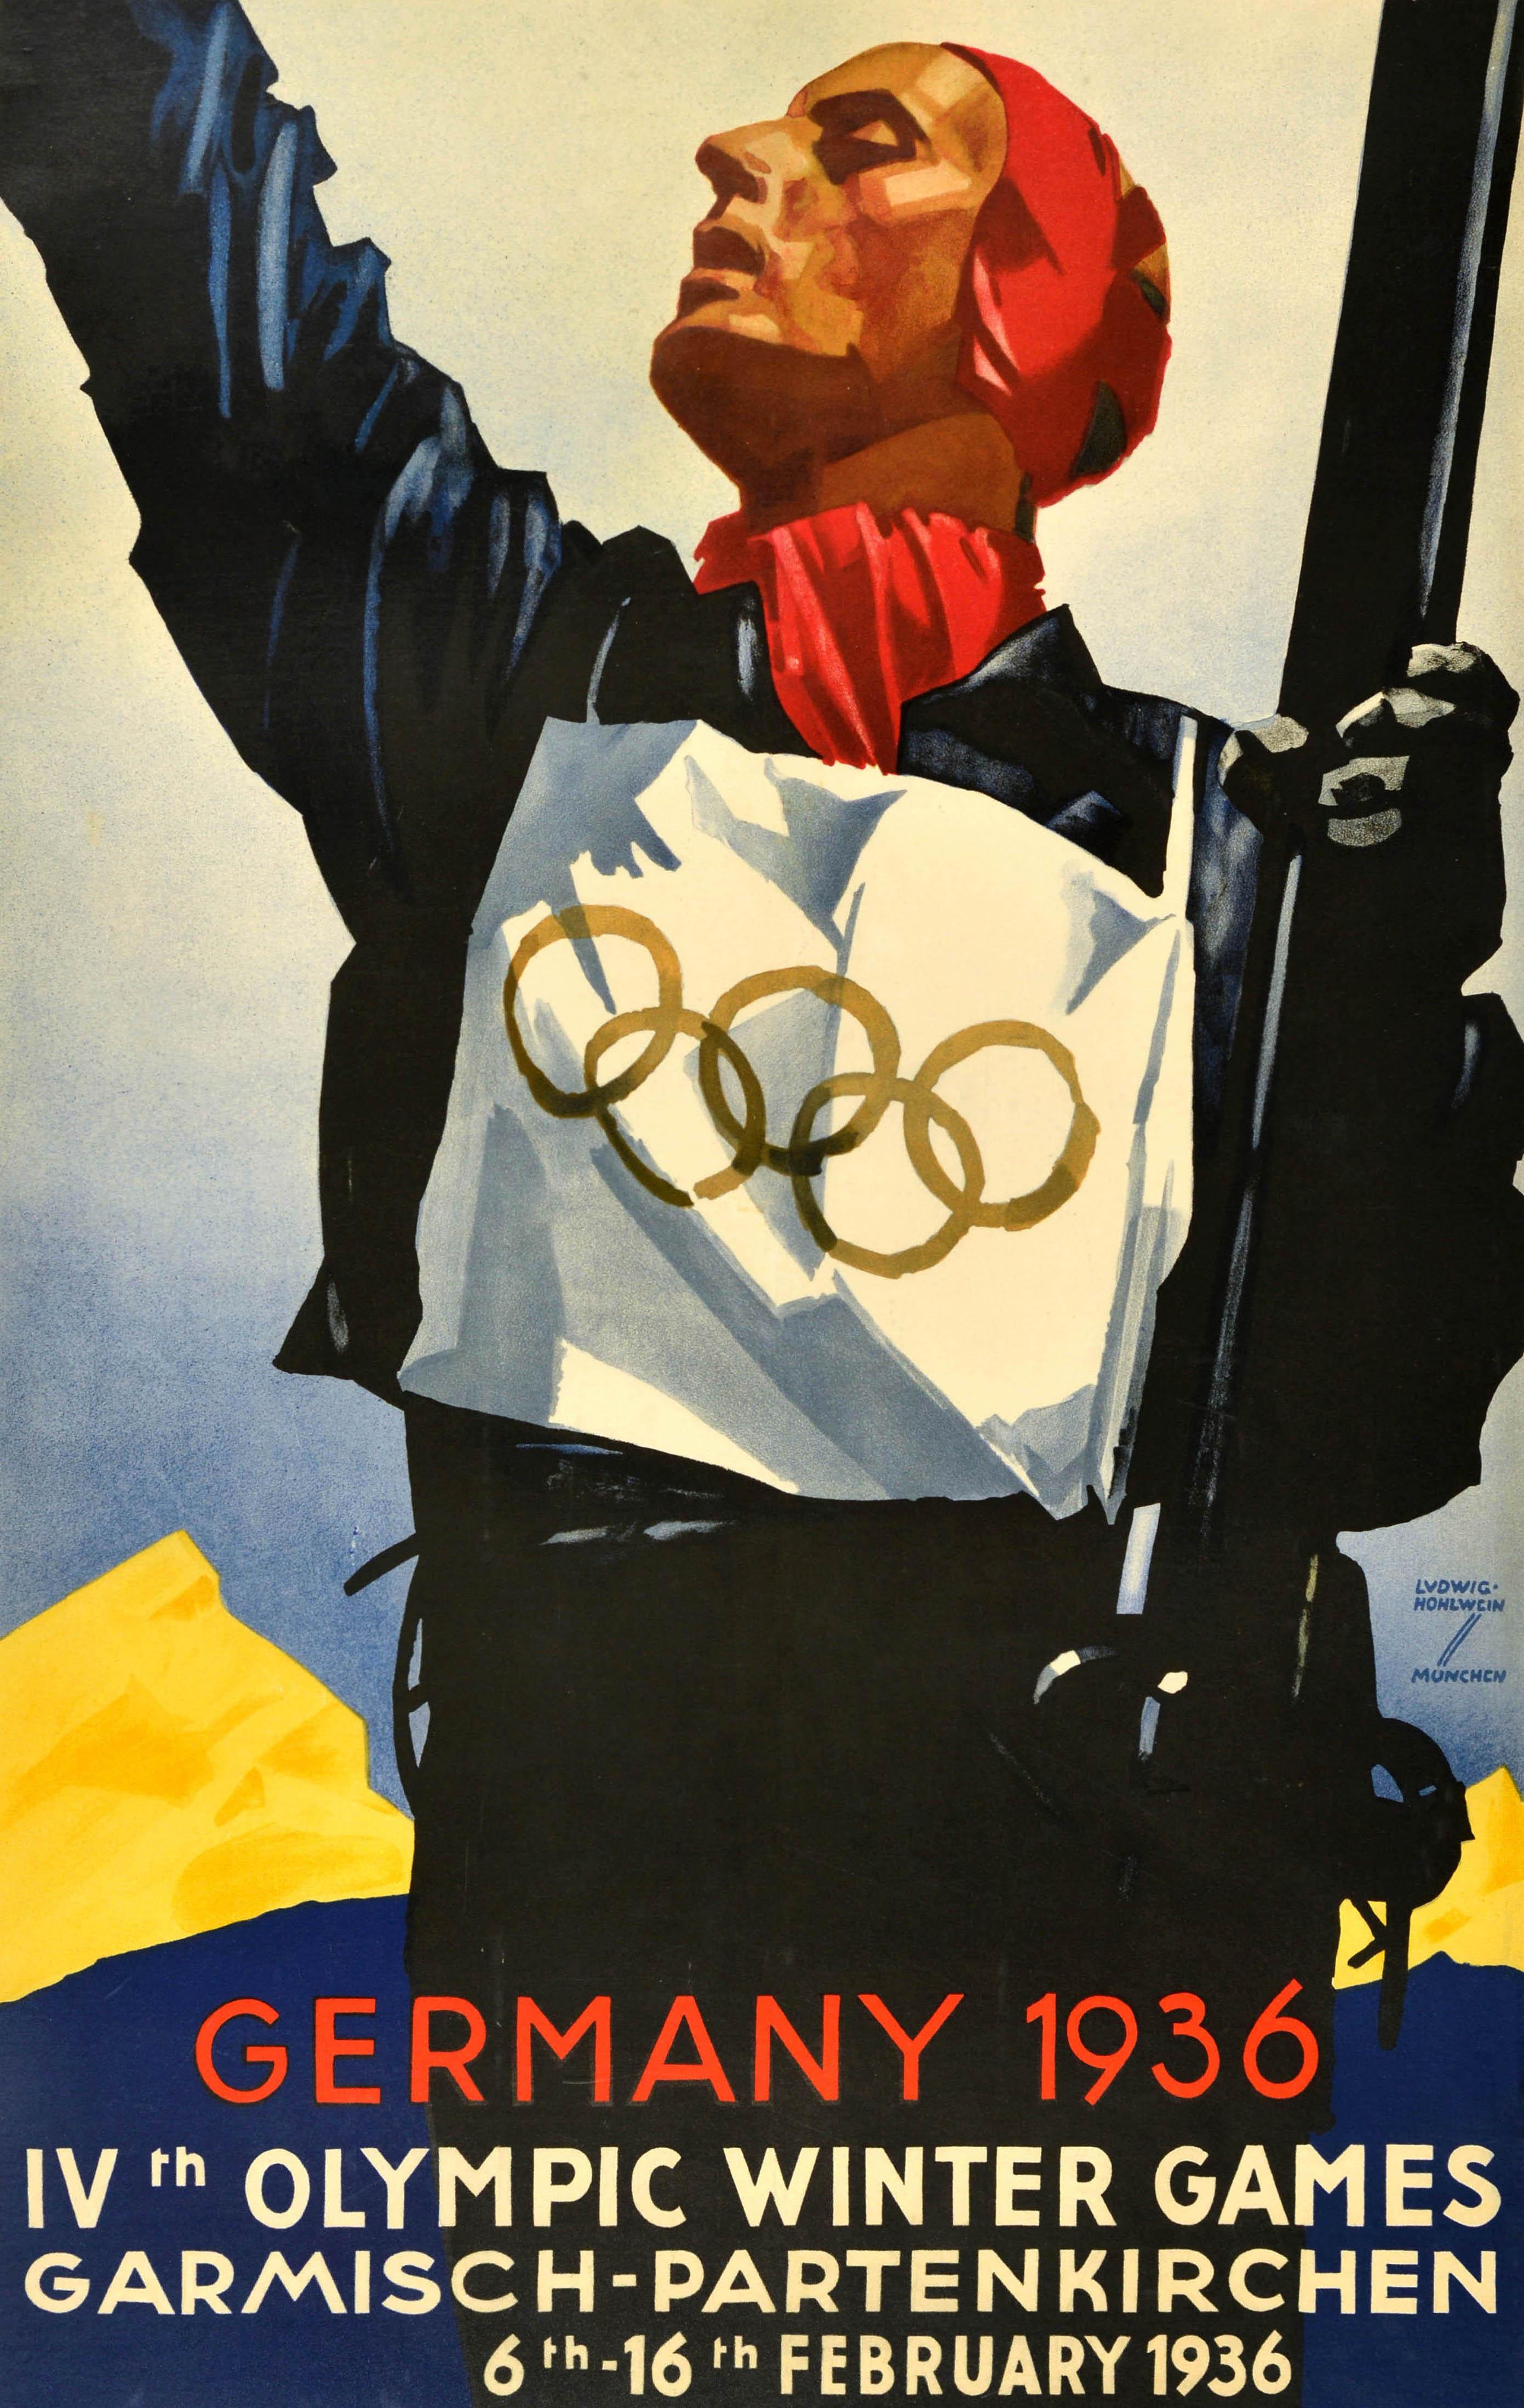 Original vintage sport poster - Germany 1936 IV Olympic Winter Games Garmisch Partenkirchen 6-16 February - featuring dynamic artwork by Ludwig Hohlwein (1874-1949) depicting a skier wearing a bib with the Olympic rings symbol on it, holding his